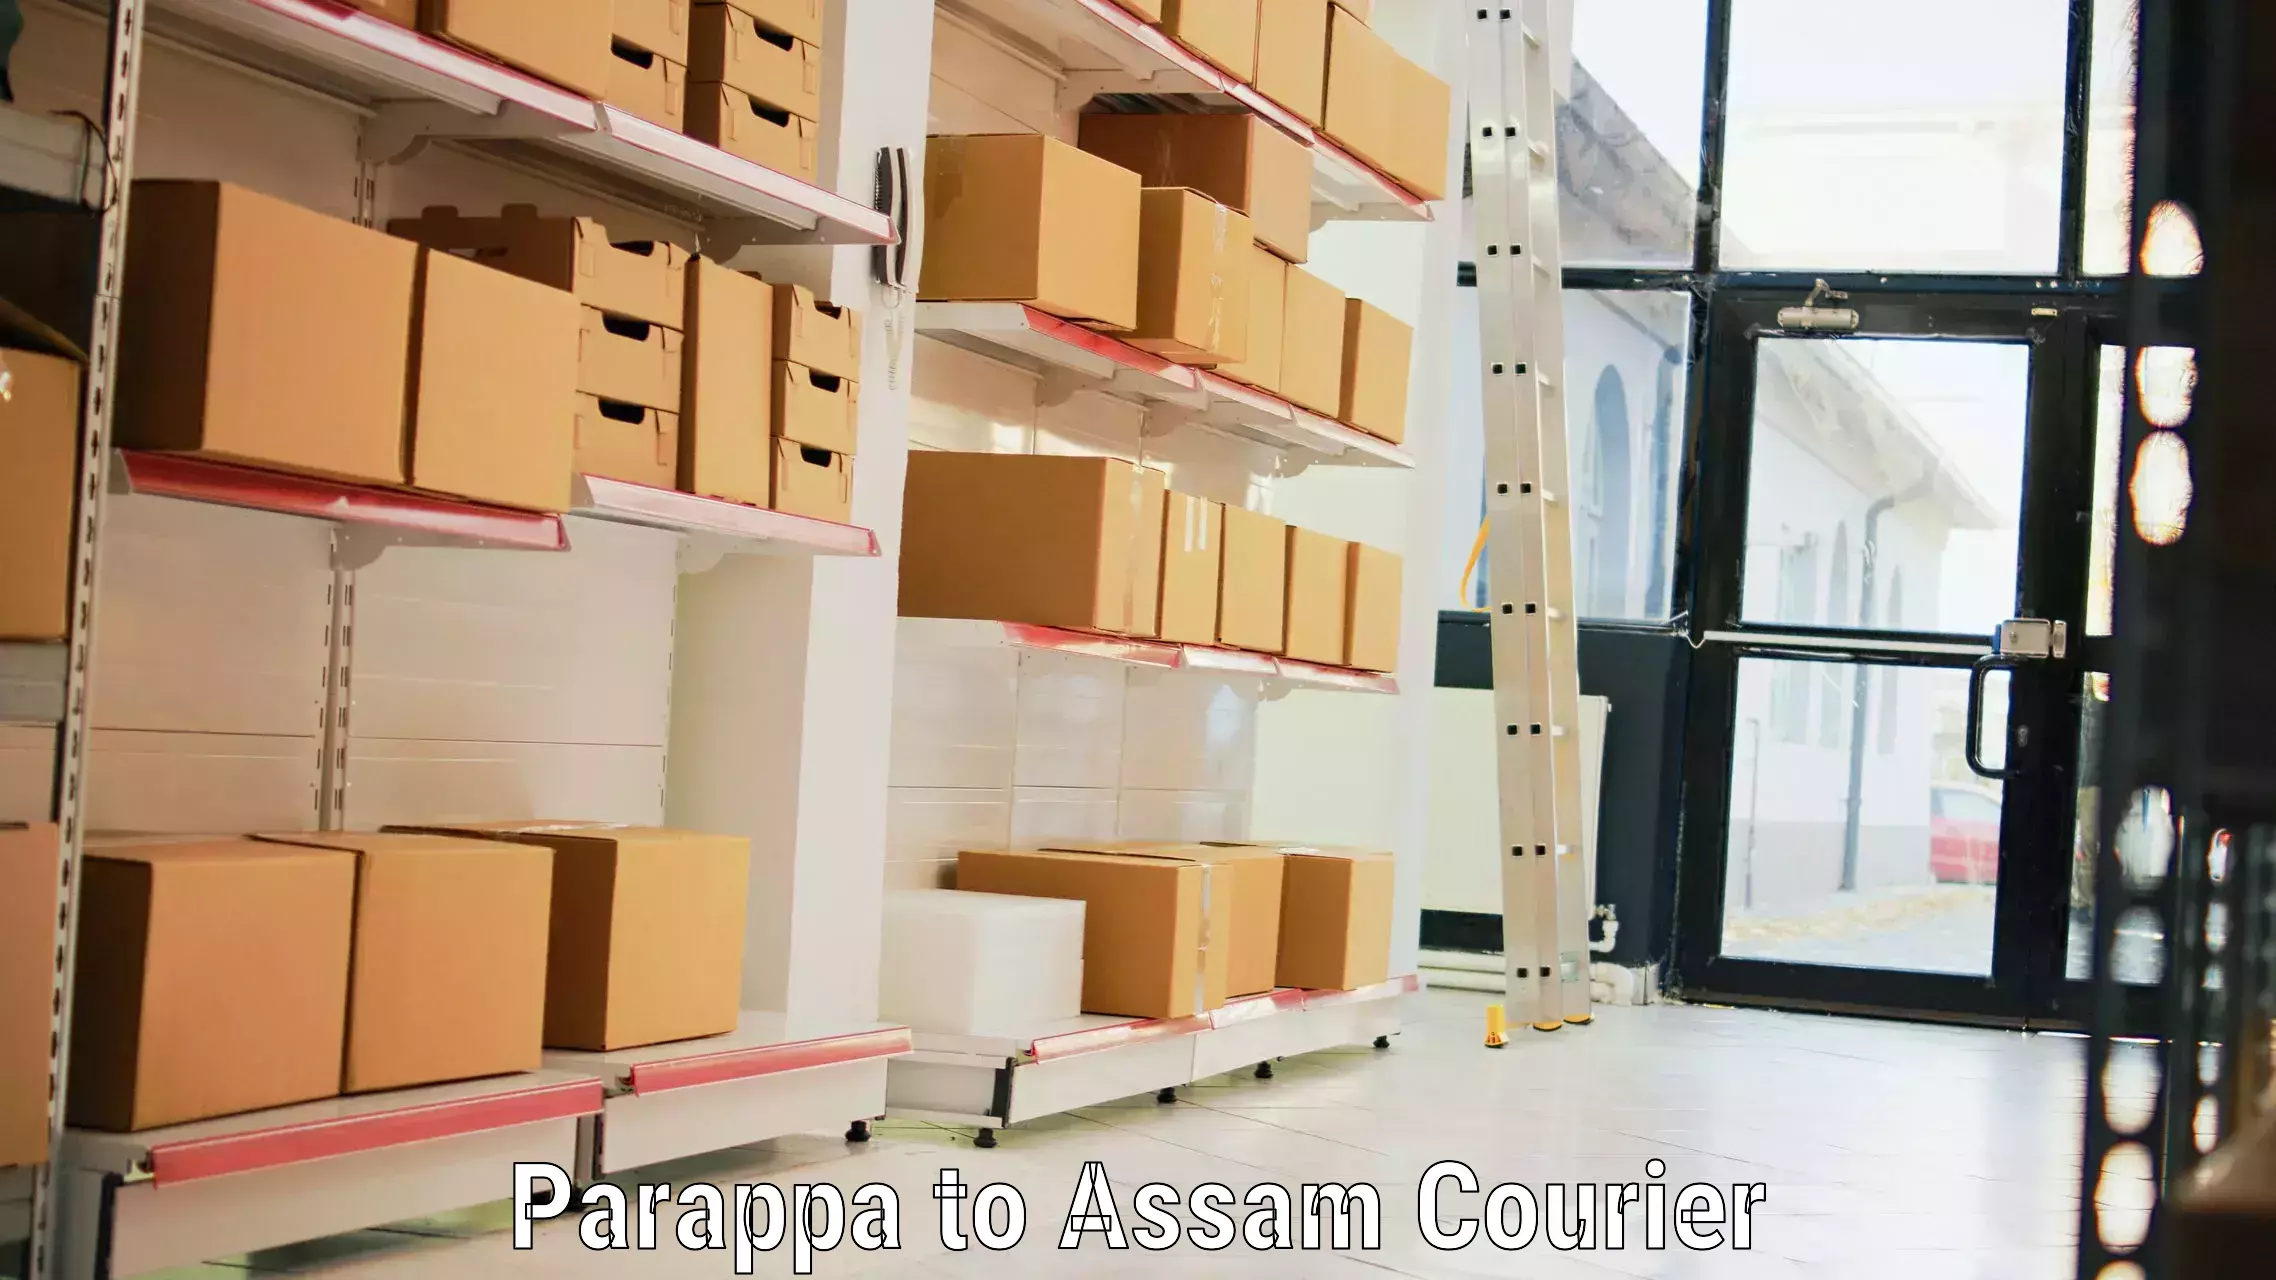 Urgent luggage shipment in Parappa to Assam